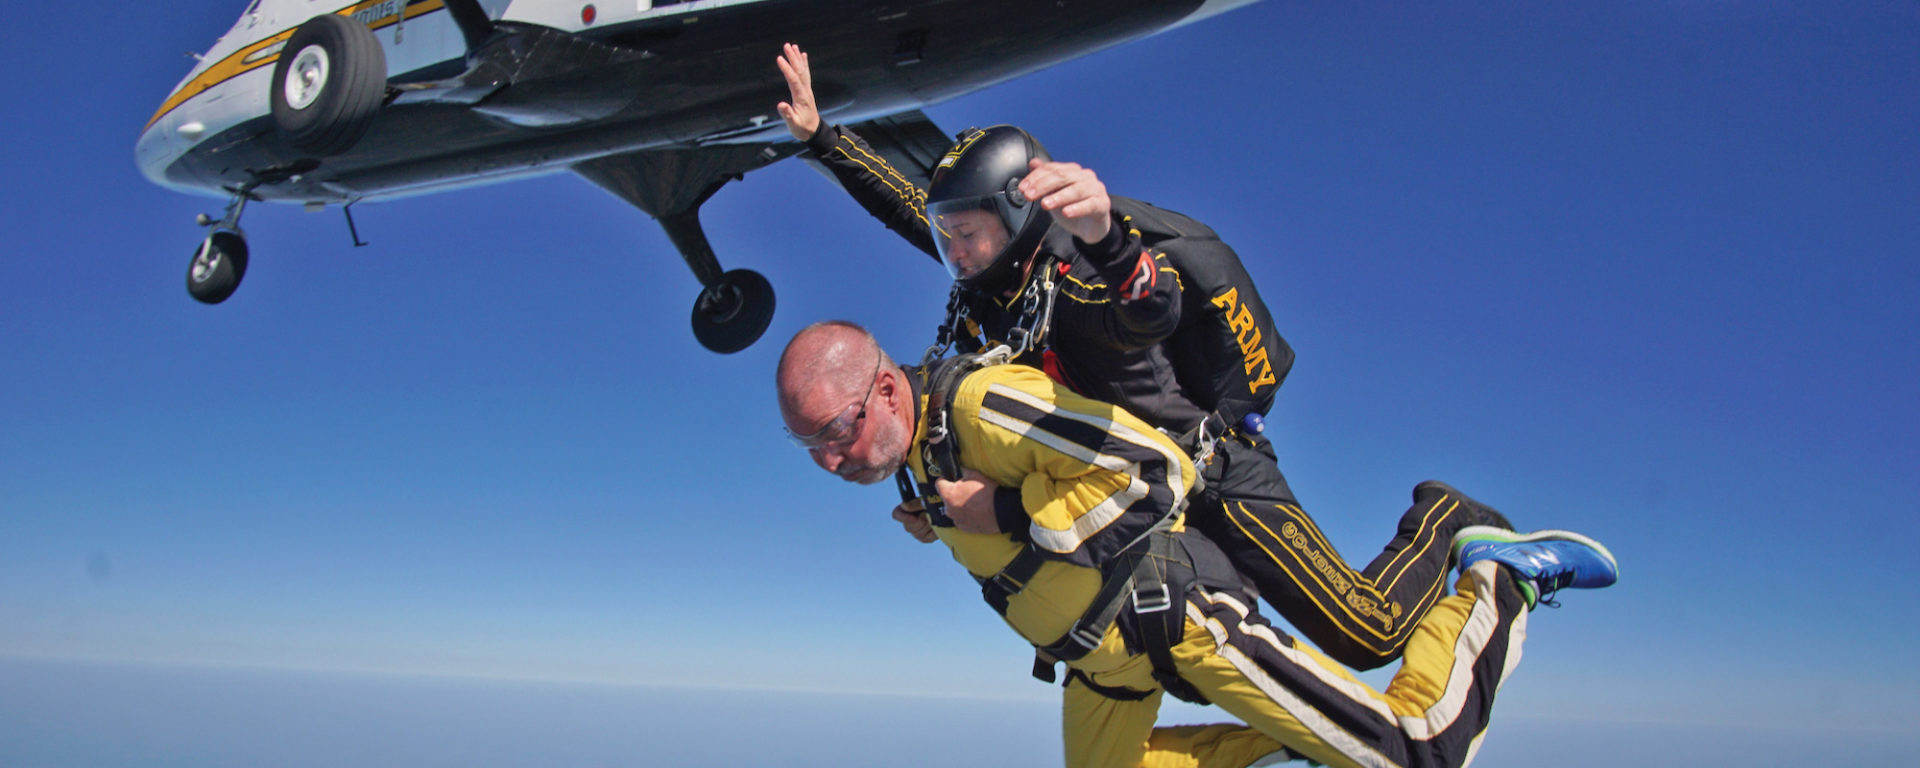 Rollins College of Business Dean Robert Dooley skydives for a cause.